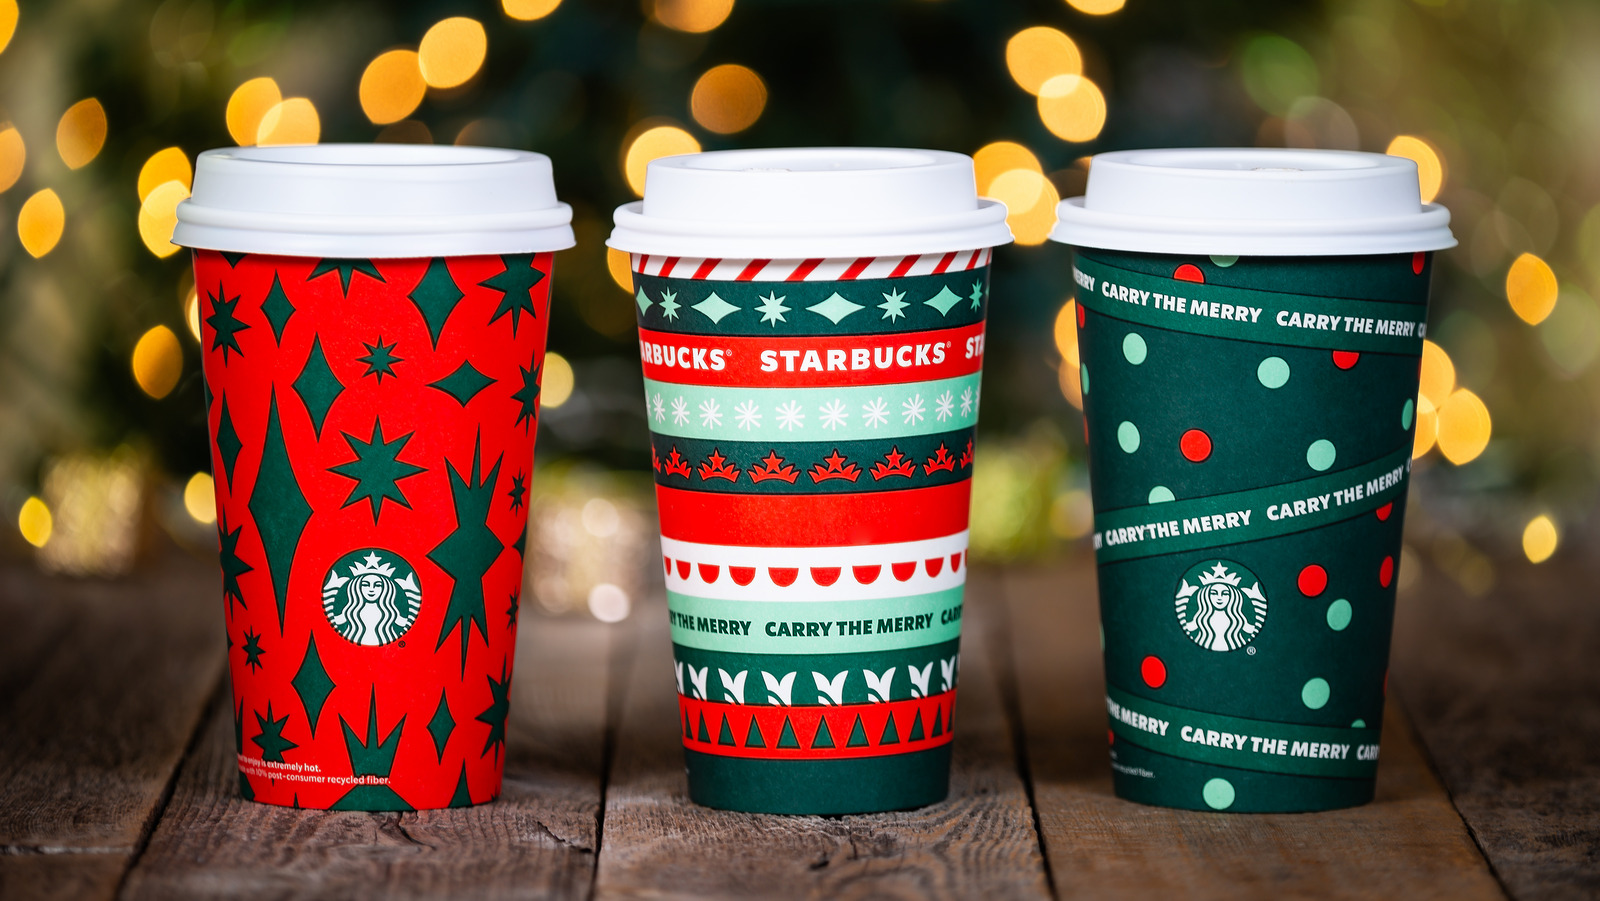 https://www.mashed.com/img/gallery/over-27-think-this-is-the-best-holiday-drink-at-starbucks/l-intro-1639839636.jpg